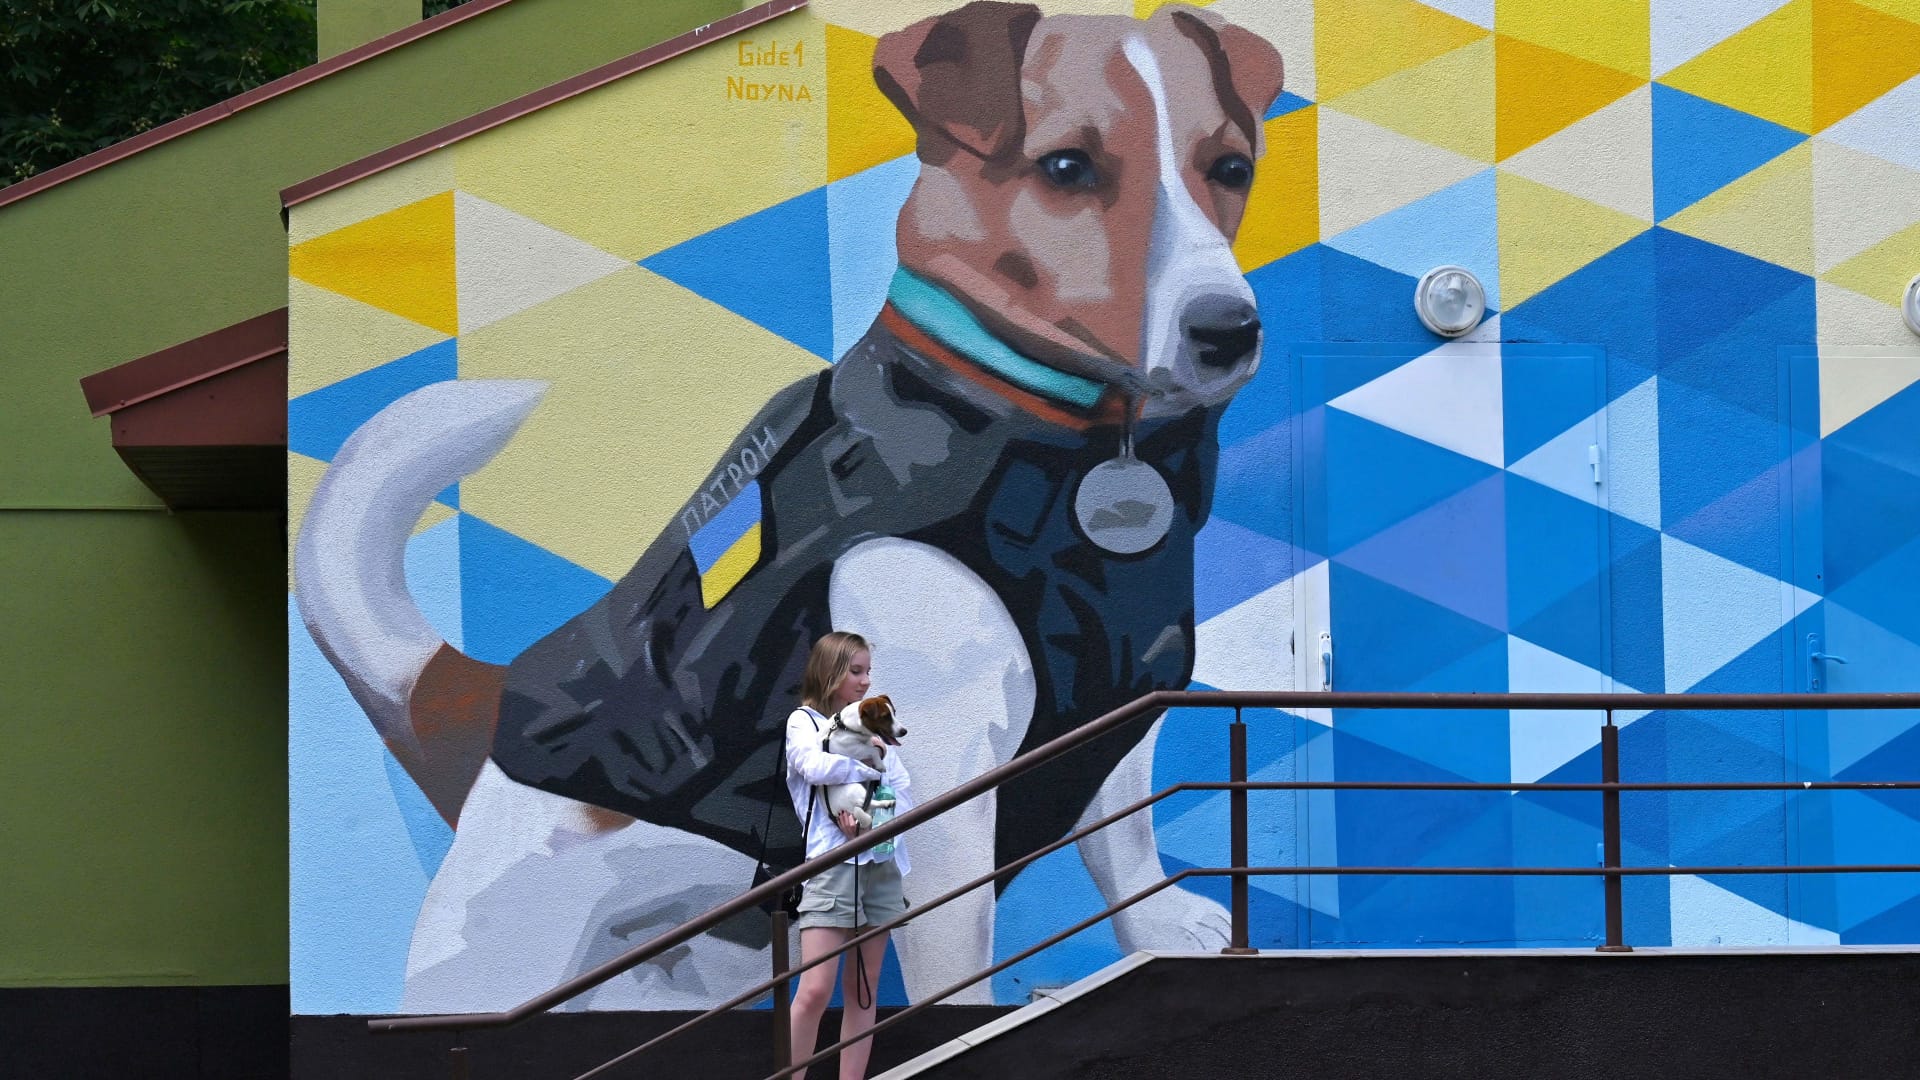 A girl holds her dog as she poses in front of a mural by artist Vitaly Gidevan, depicting a Jack Russell Terrier called Patron renown for helping sappers demine areas recaptured from Russian forces, in Kyiv on June 14, 2022. Patron, who has more than 290,000 followers on Instagram, received a medal for Dedicated Service from Zelensky in May and was awarded a special prize at the Cannes Film Festival the same month.